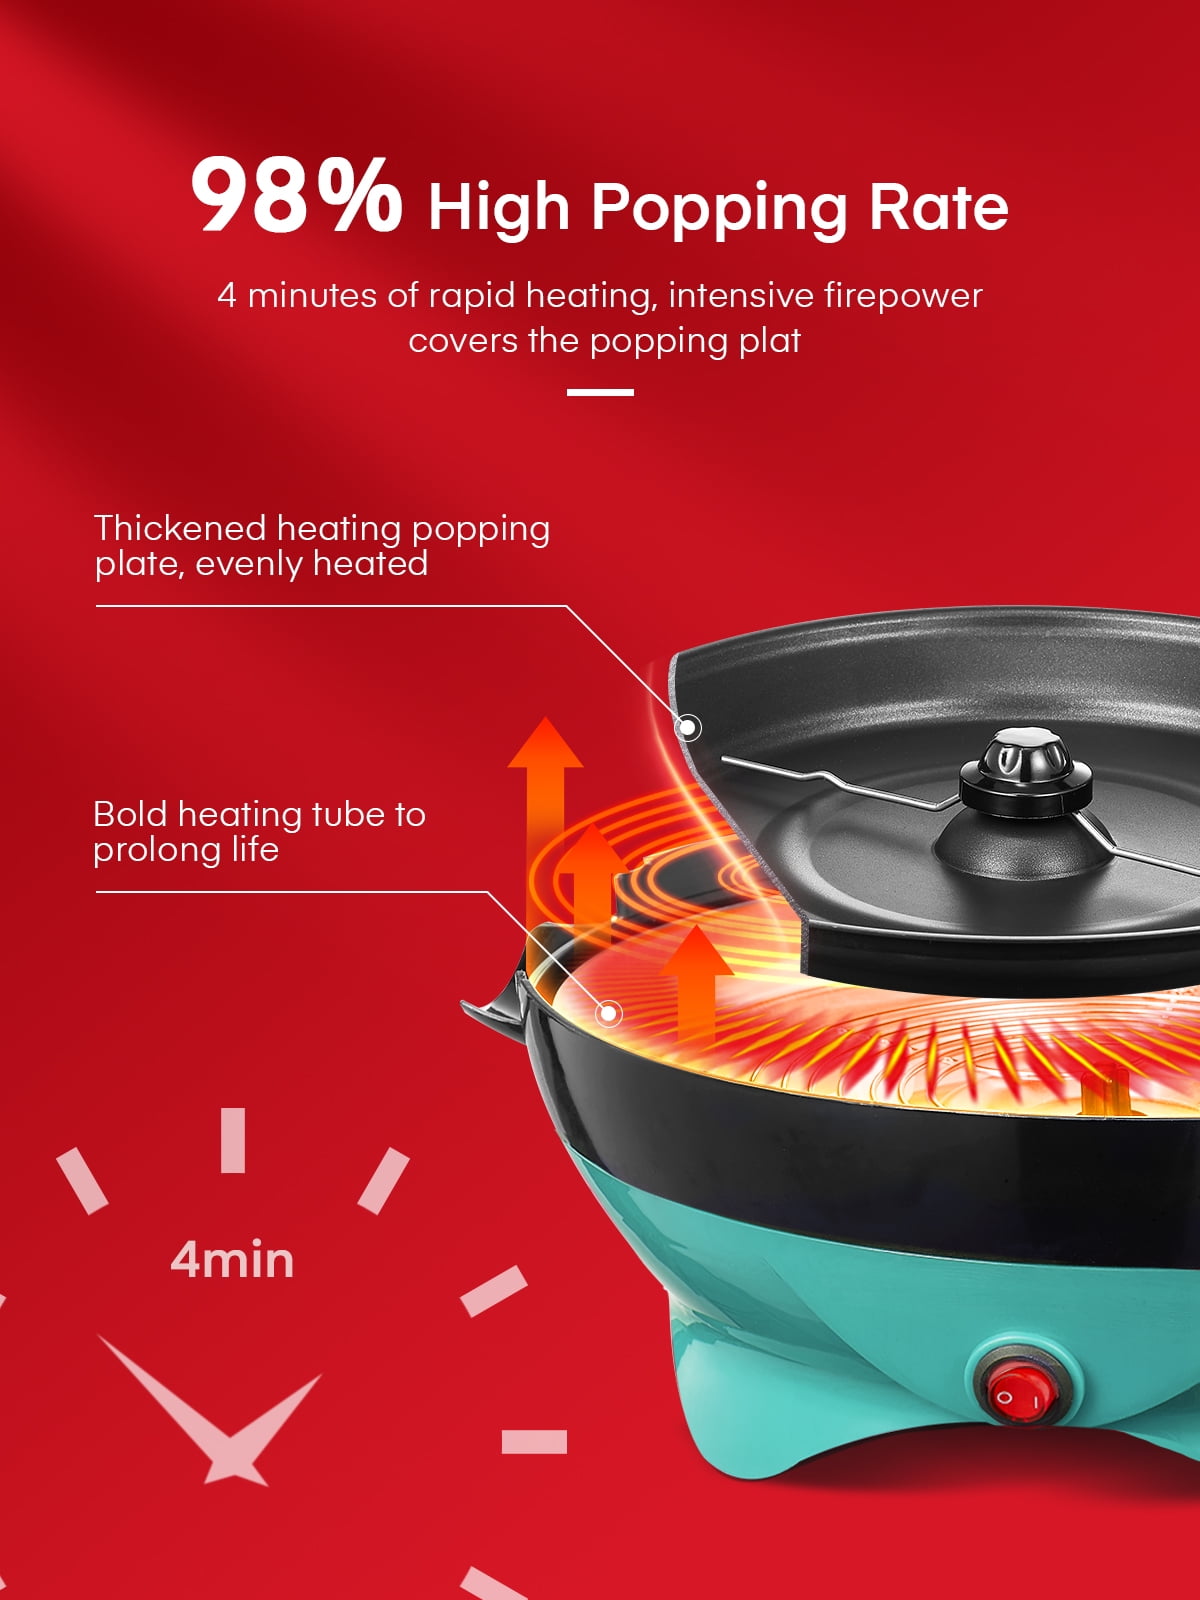  Electric Hot Oil Stirring Popcorn Maker，800W Popcorn Popper  Machine with Measuring Cups and Large Lid, 6 Quart, Red, 34*29*13cm,  RH-906: Home & Kitchen